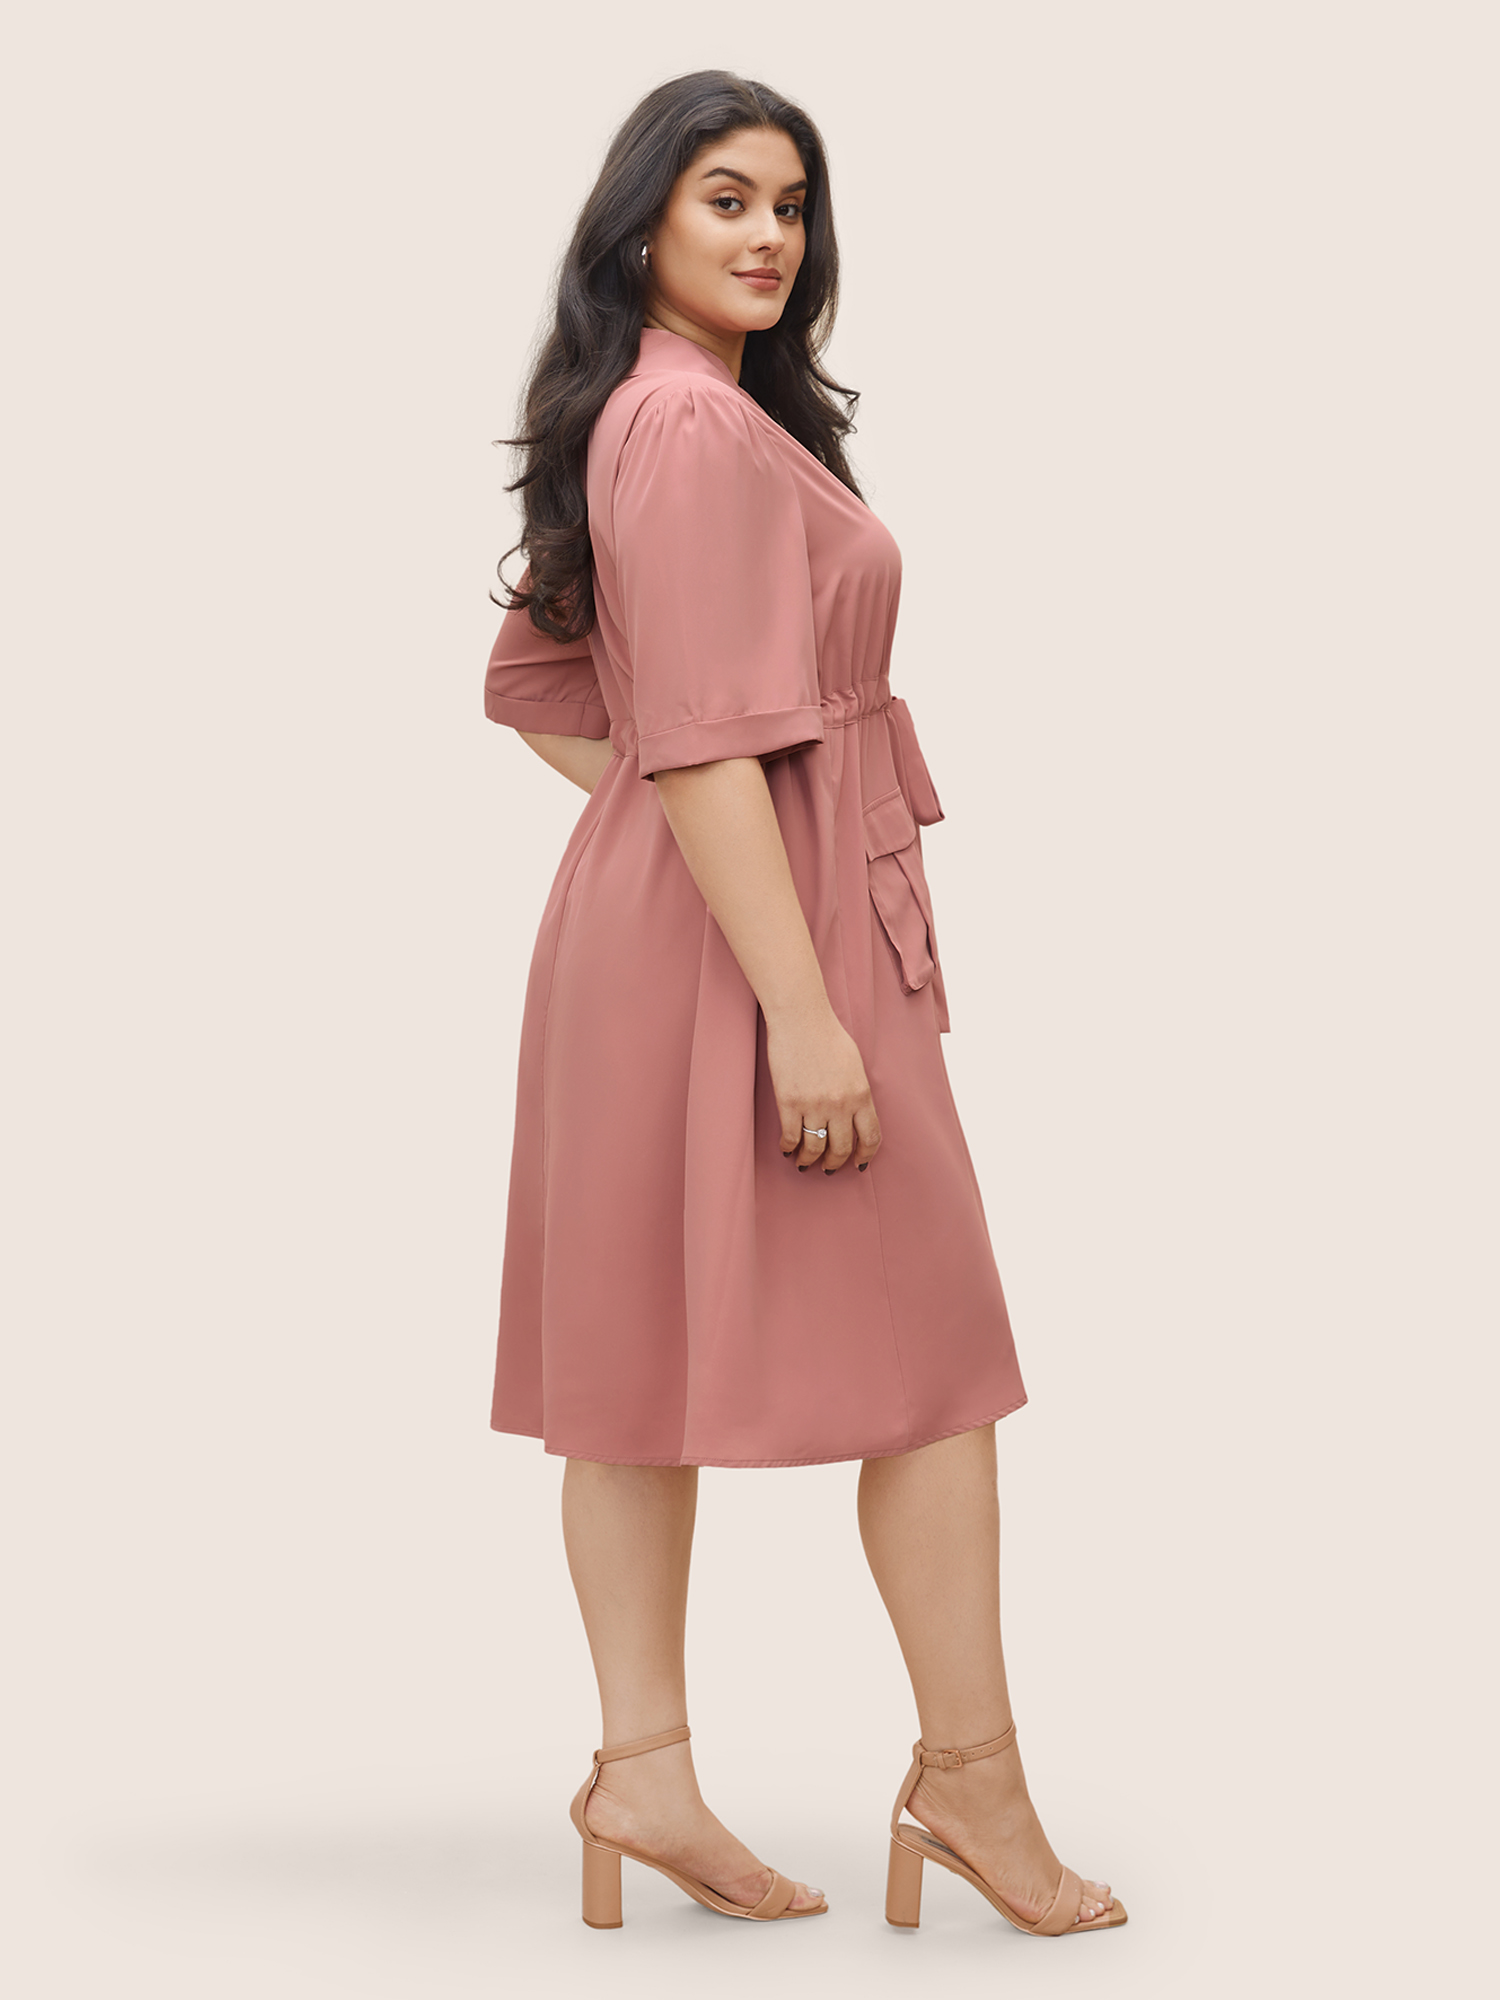 

Plus Size Solid Patched Pocket Ties Gathered Dress Crepe Women At the Office Non Curvy Midi Dress BloomChic